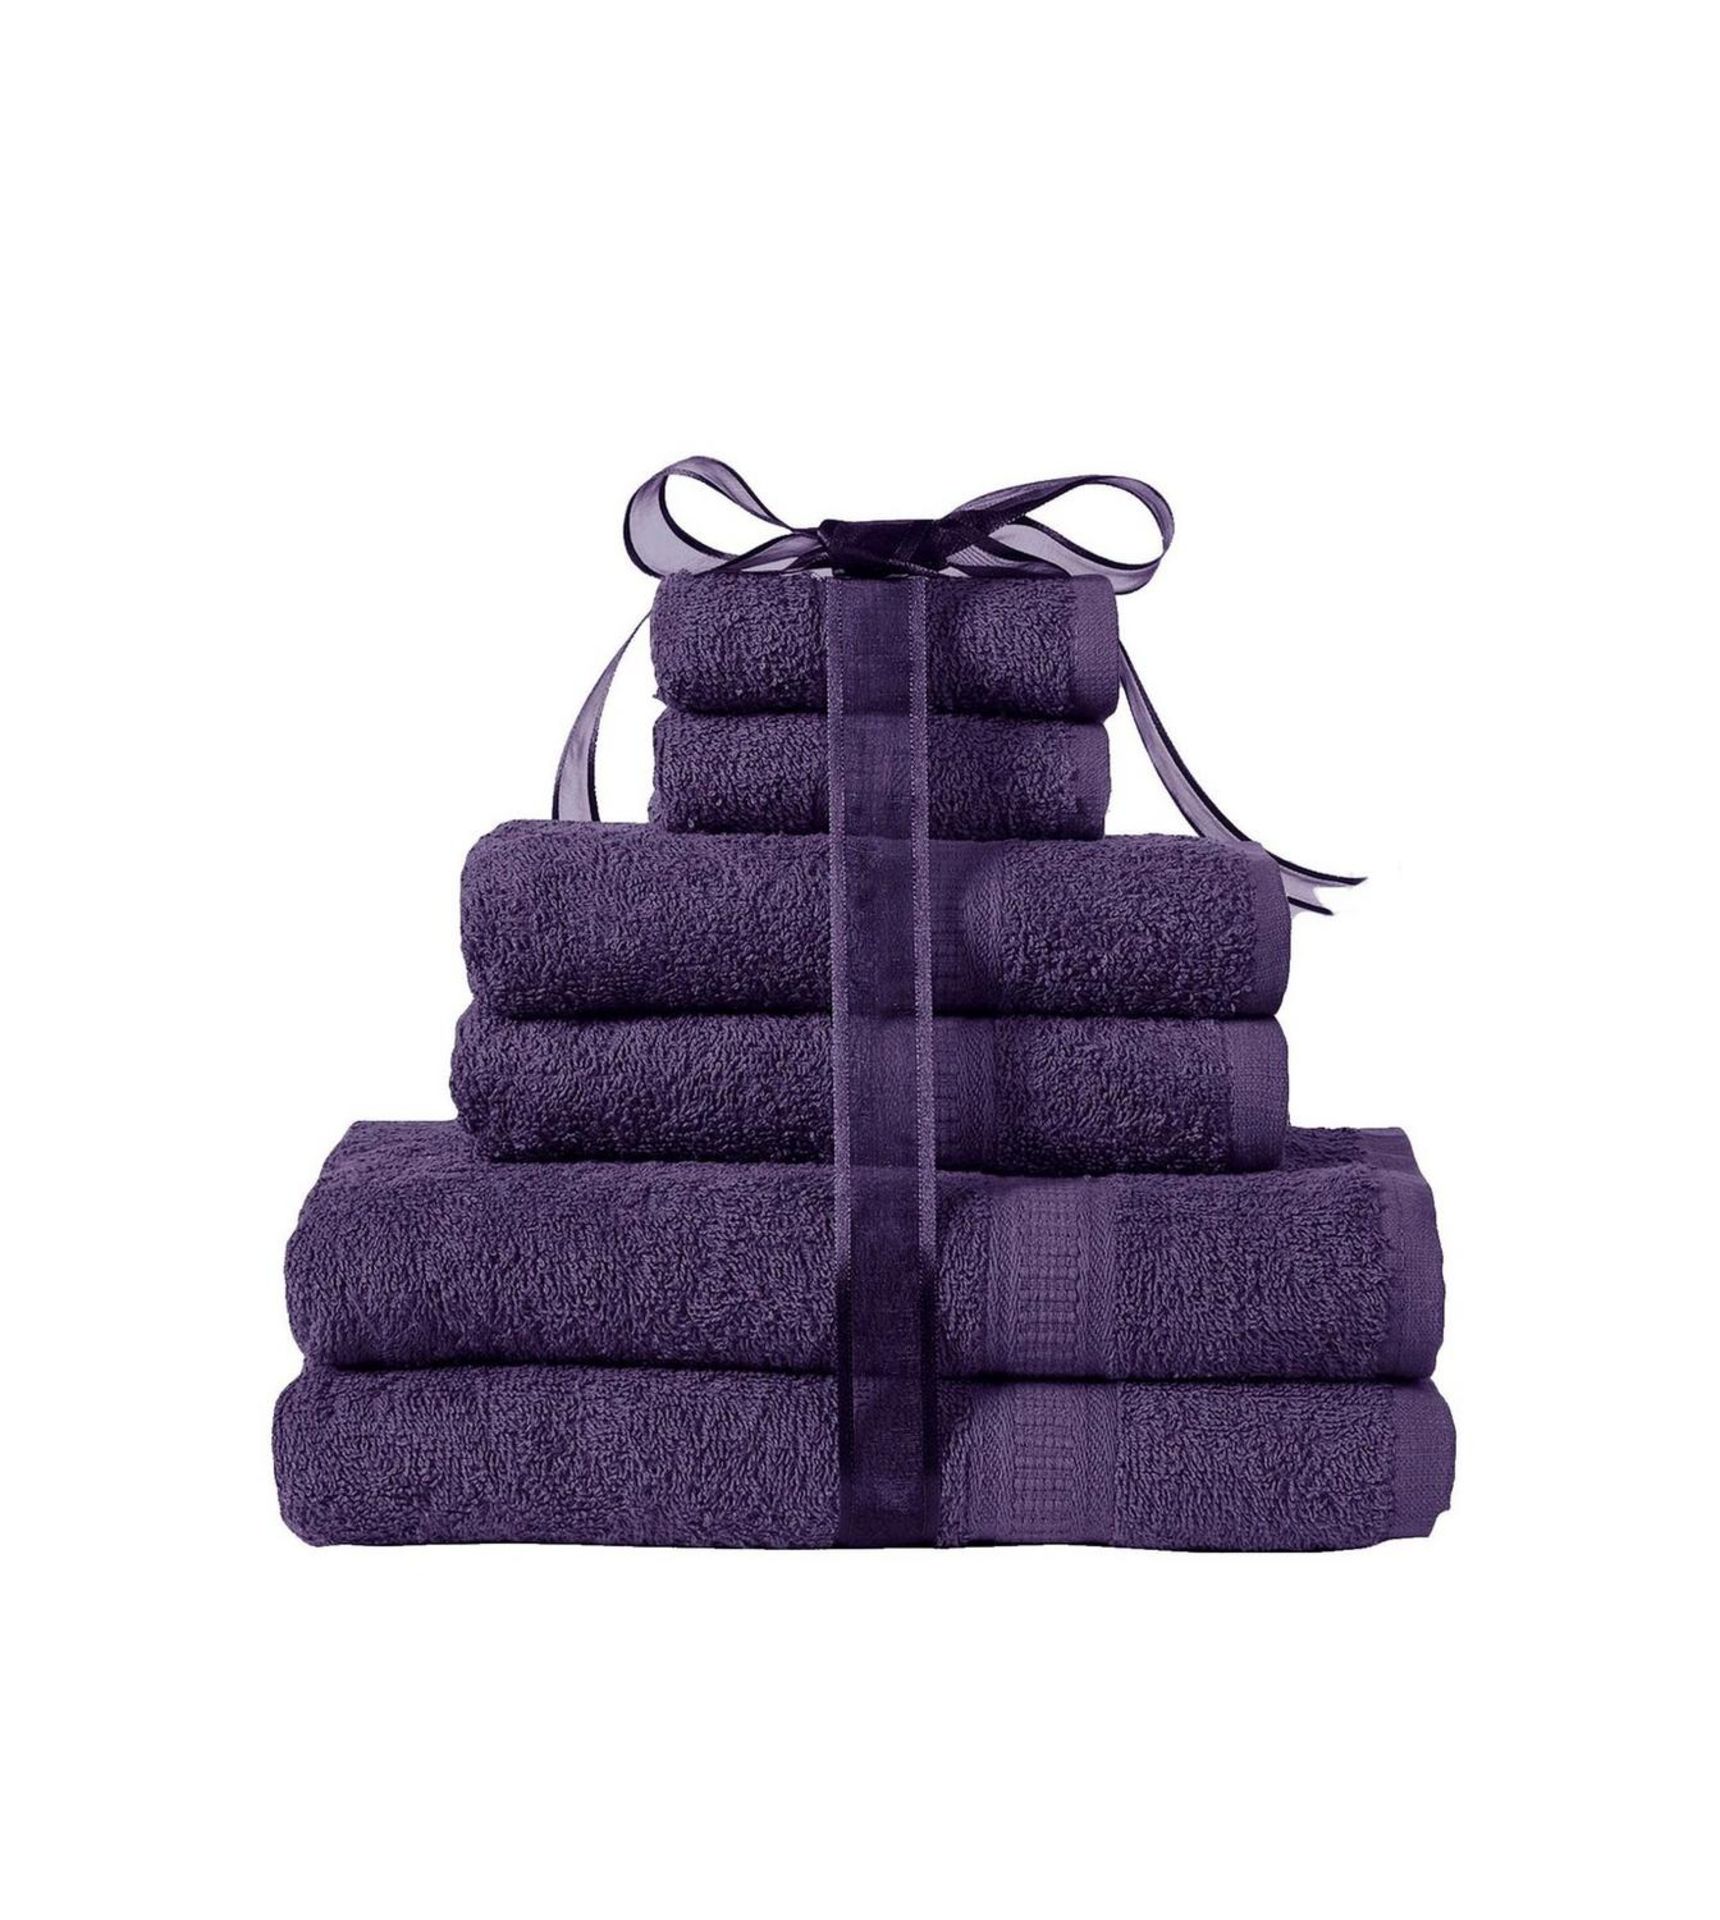 1 AS NEW BAGGED 6 PIECE TOWEL BALE IN PLUM